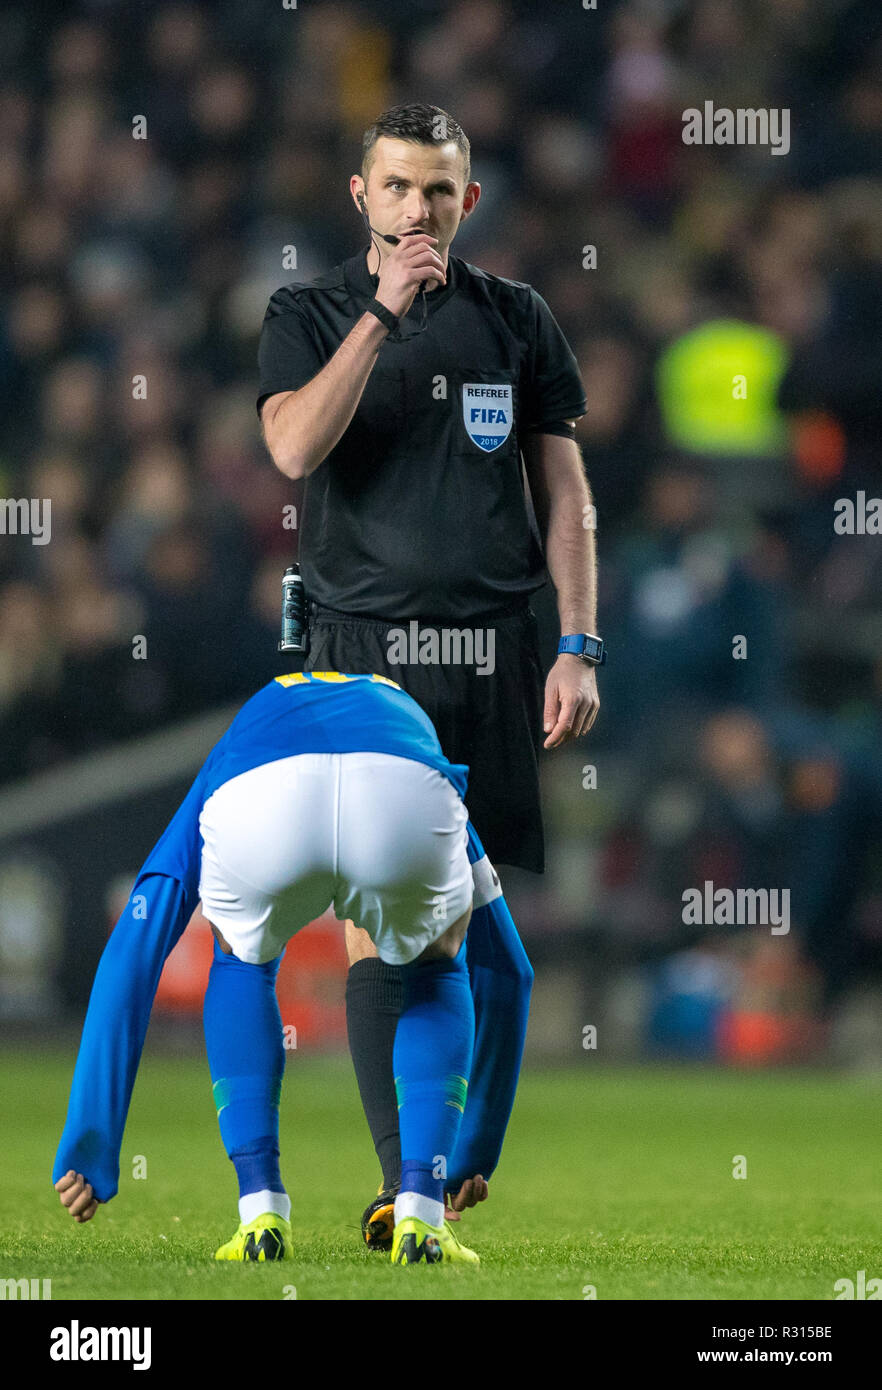 Milton Keynes, UK. 20th November, 2018. Referee Michael Oliver blows his whistle to stop play as Neymar (Paris Saint-Germain) of Brazil goes down injured during the International match between Brazil and Cameroon at stadium:mk, Milton Keynes, England on 20 November 2018. Photo by Andy Rowland. Credit: Andrew Rowland/Alamy Live News Stock Photo